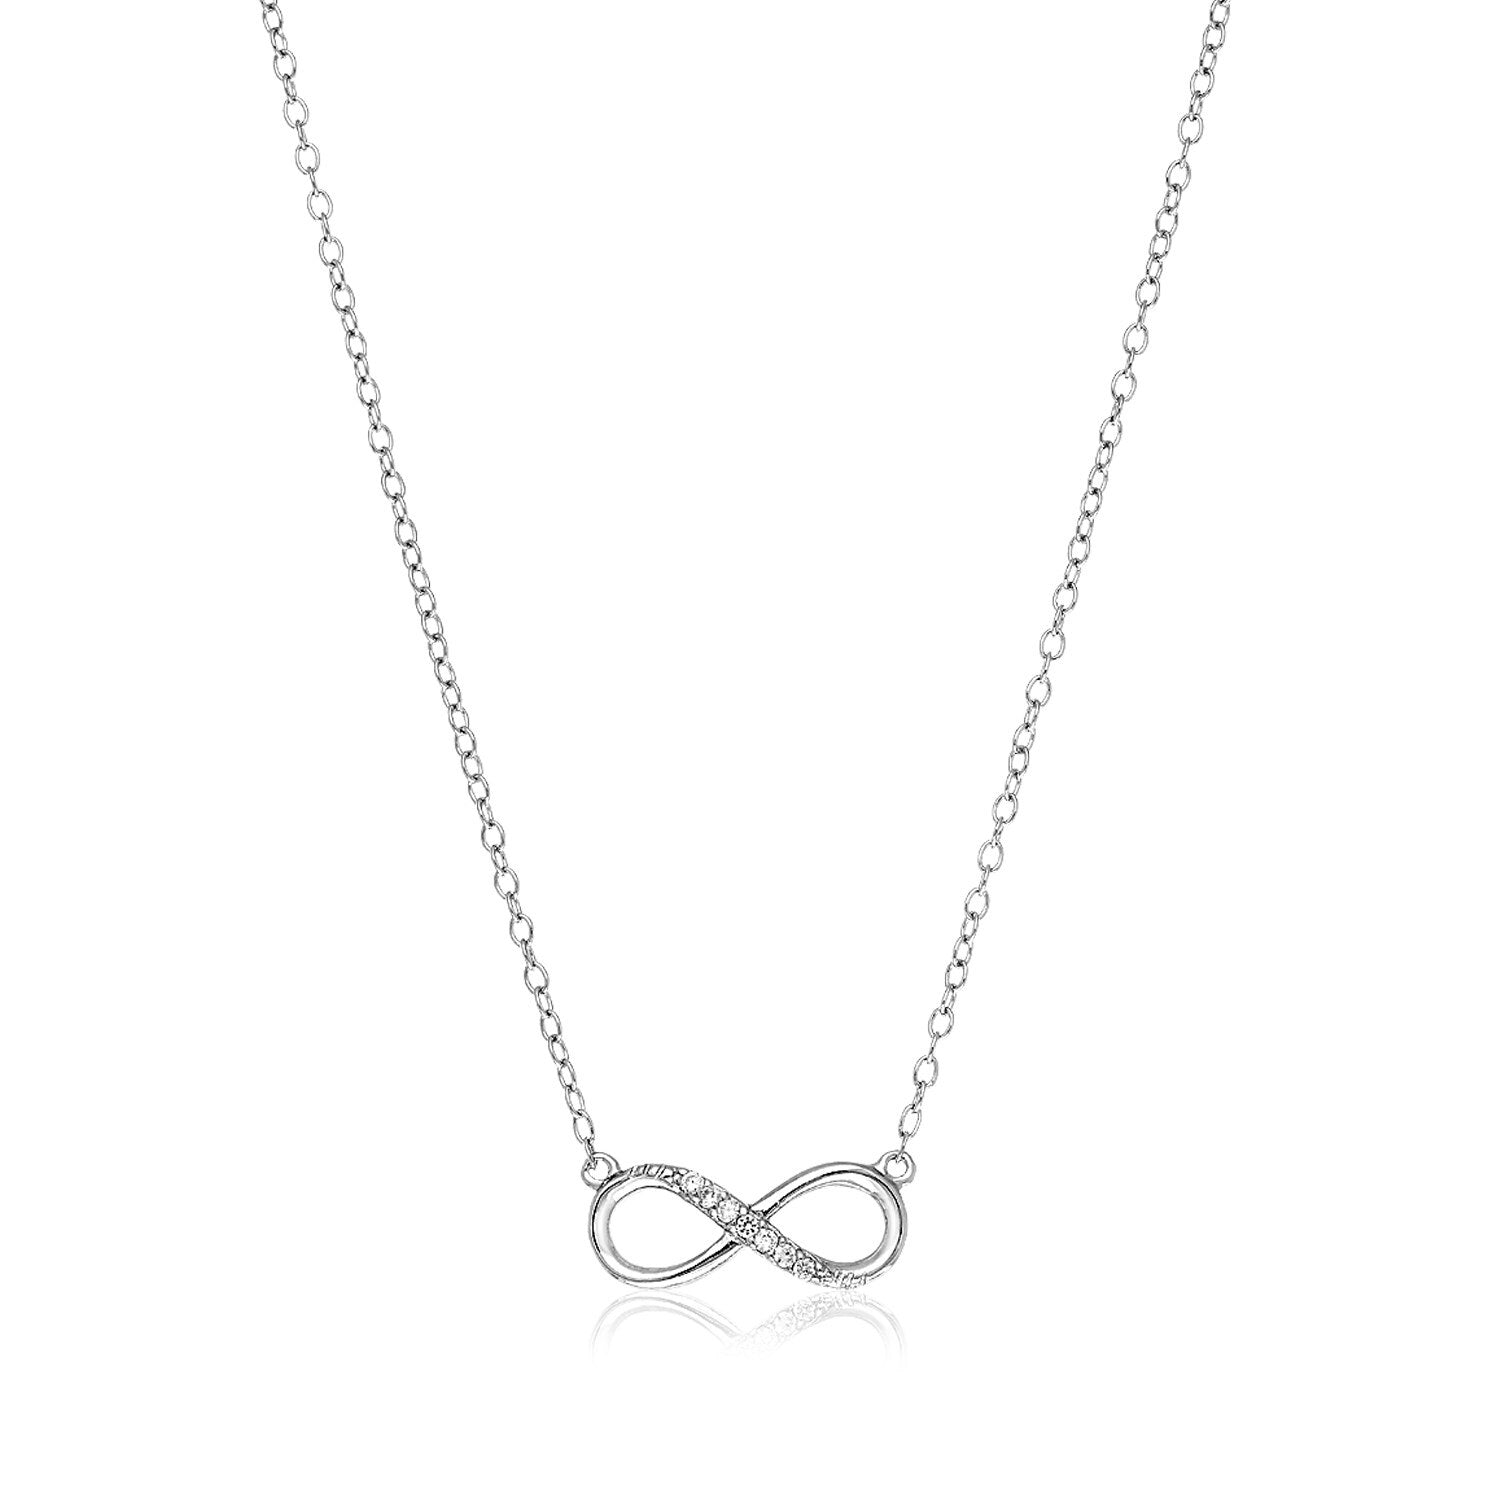 Sterling Silver Petite Infinity Symbol Necklace with Cubic Zirconias, size 18''